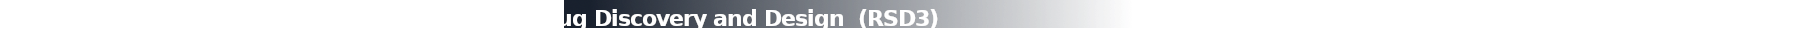 Resource for Structure-based Computational Drug Discovery and Design (RSD3) Logo